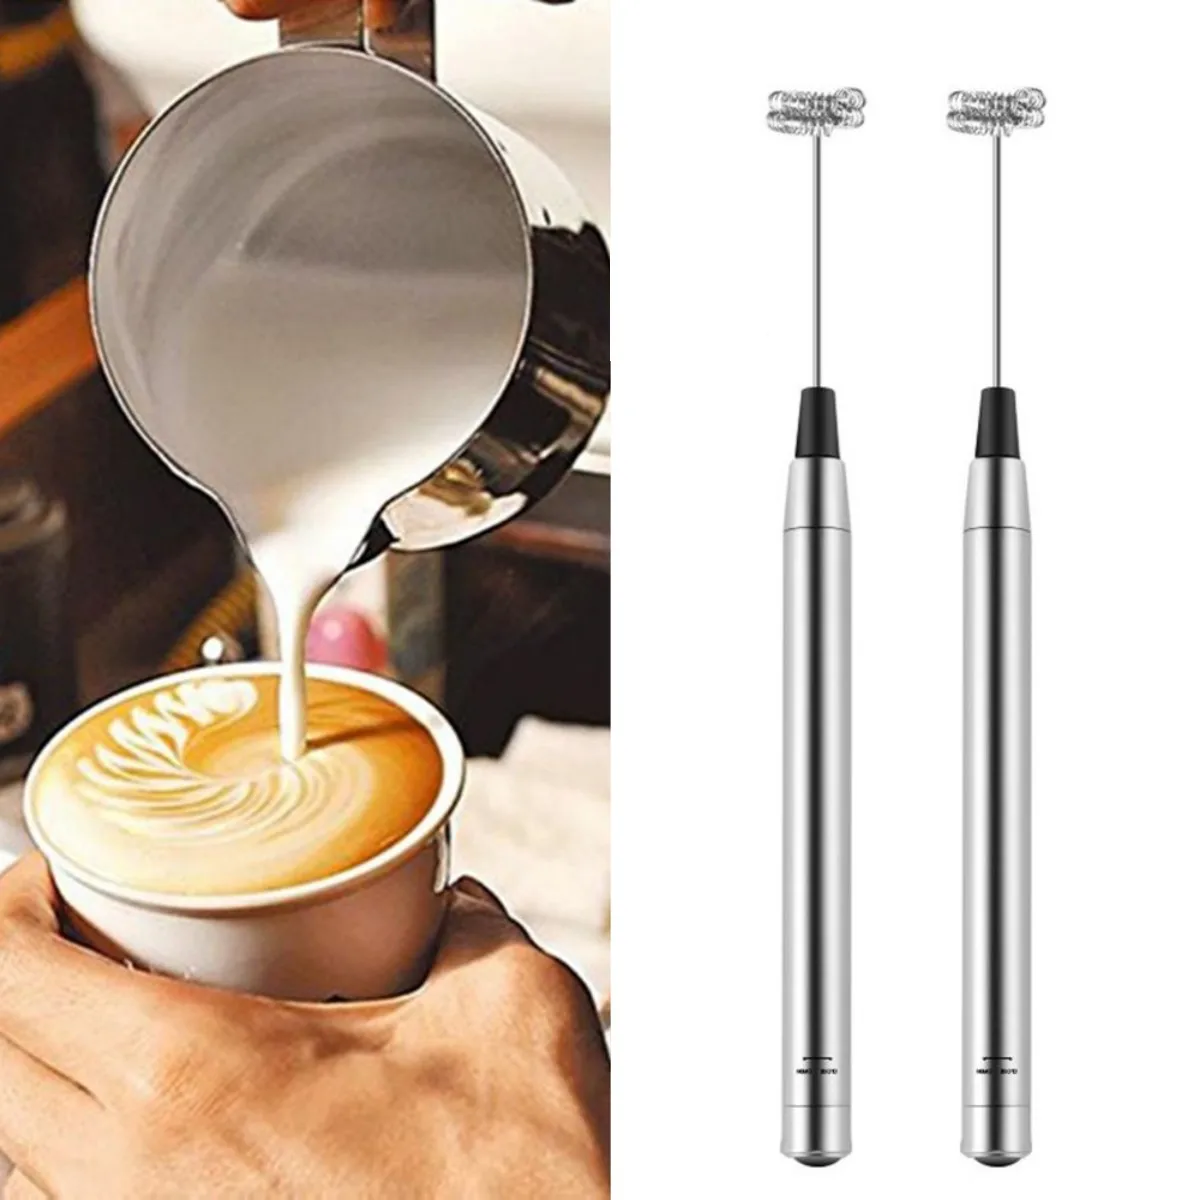 1pc Electric Milk Frother With Egg Beater Whisk, Dual Stainless Steel  Stirring Head Milk Foamer For Lattes, Coffee, Cappuccino, Frappe, Matcha,  Hot Chocolate - Battery Operated (batteries Not Included)